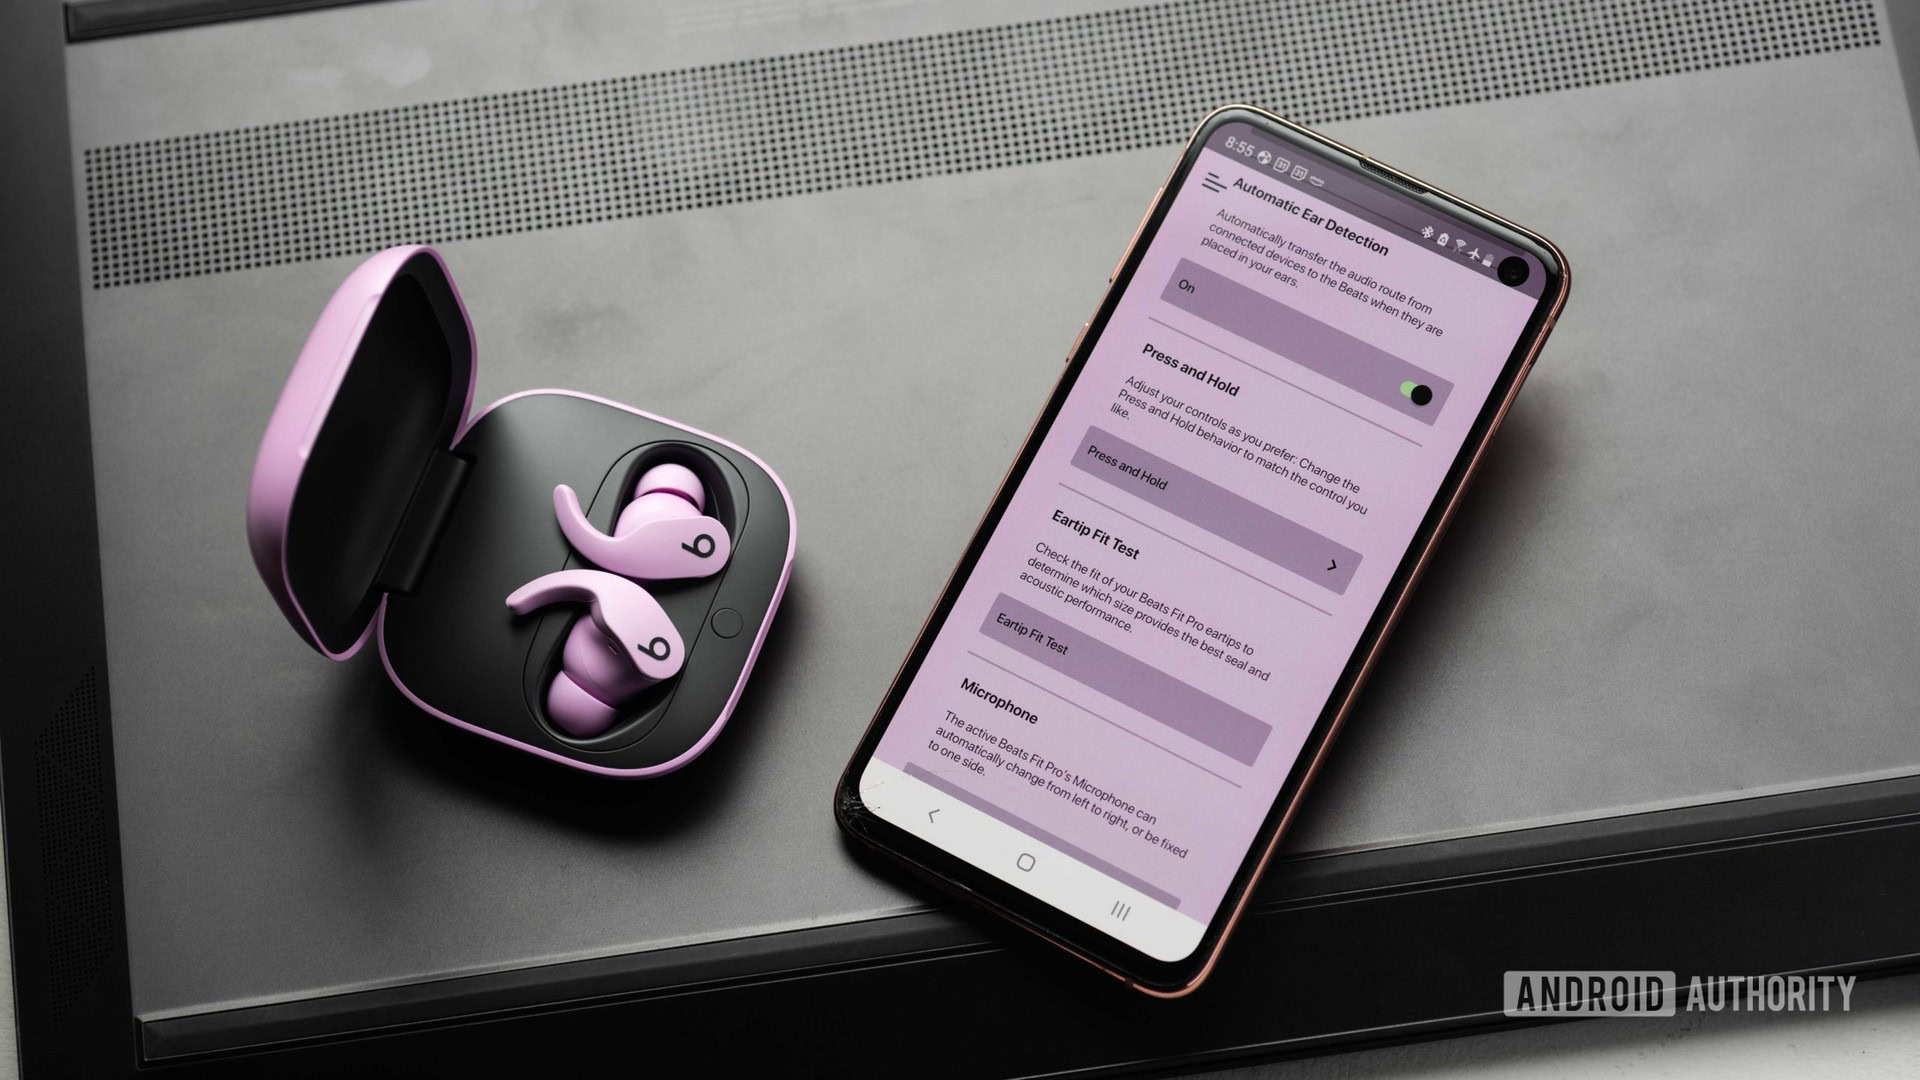 The Beats Fit Pro noise cancelling true wireless earbuds in the open charging case and next to a Samsung Galaxy S10e with the Beats app open. The app has a purple tint to it, presumably to match the earphones.